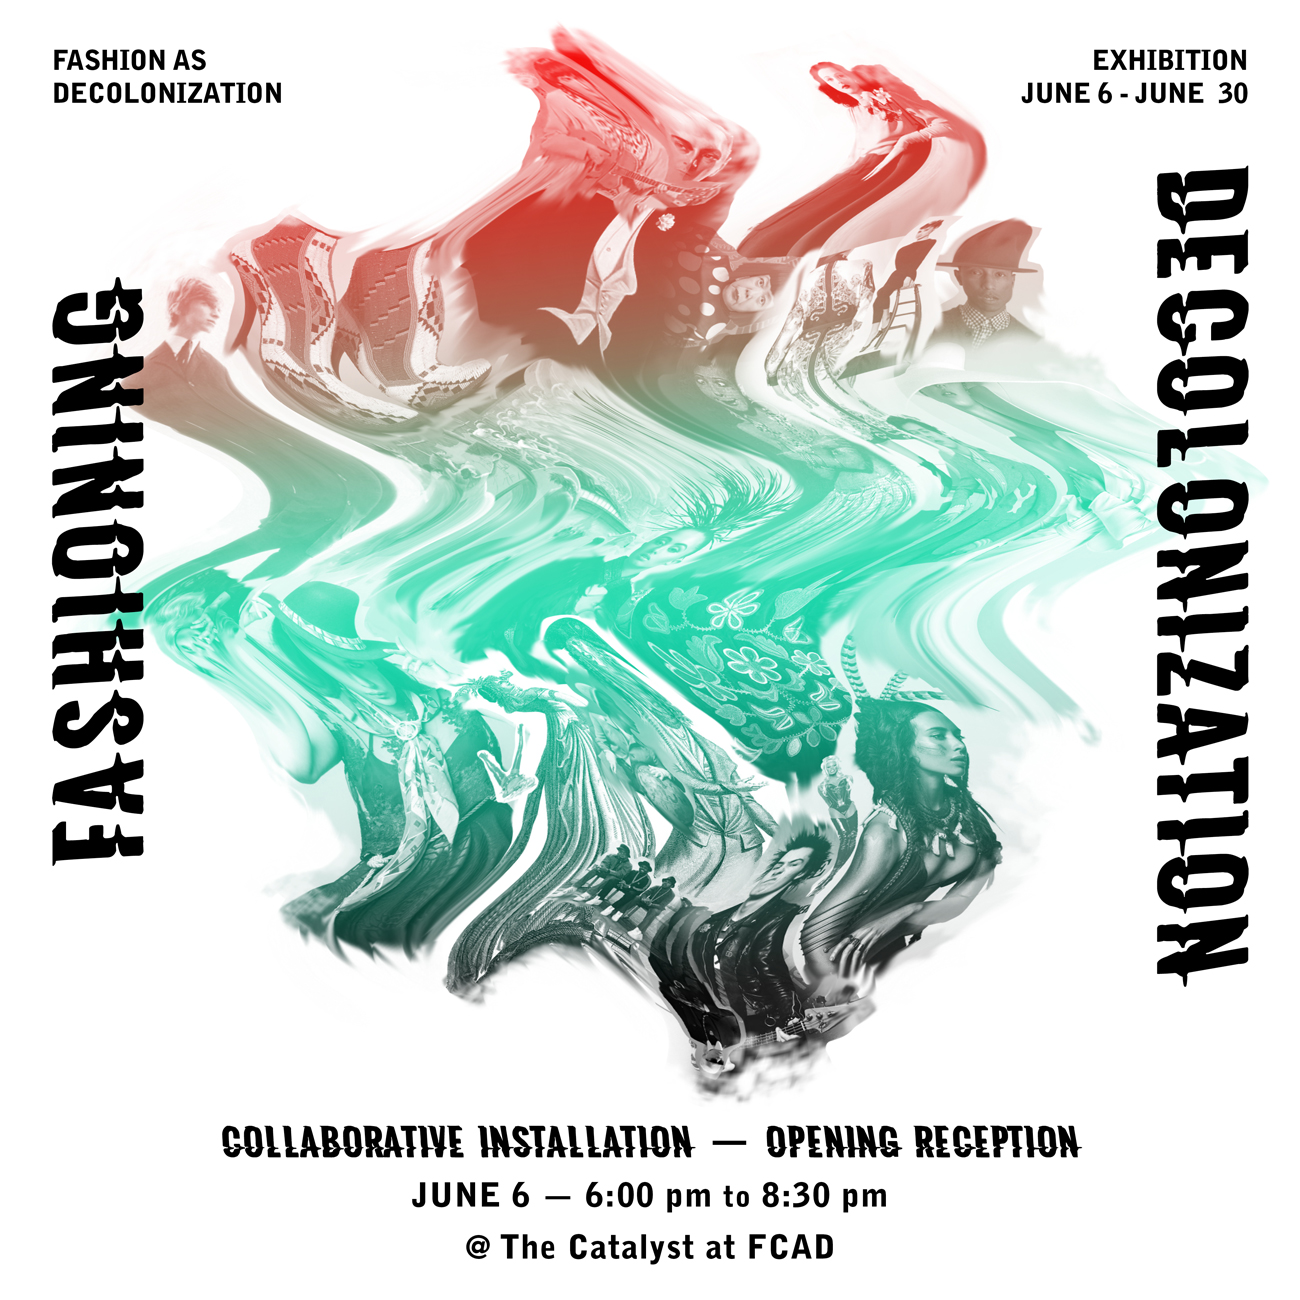 Fashioning Decolonization, a collaborative installation starting on June 6th to June 30th from 6:00pm to 8:30pm in The Catalyst at Faculty of Communication and Design